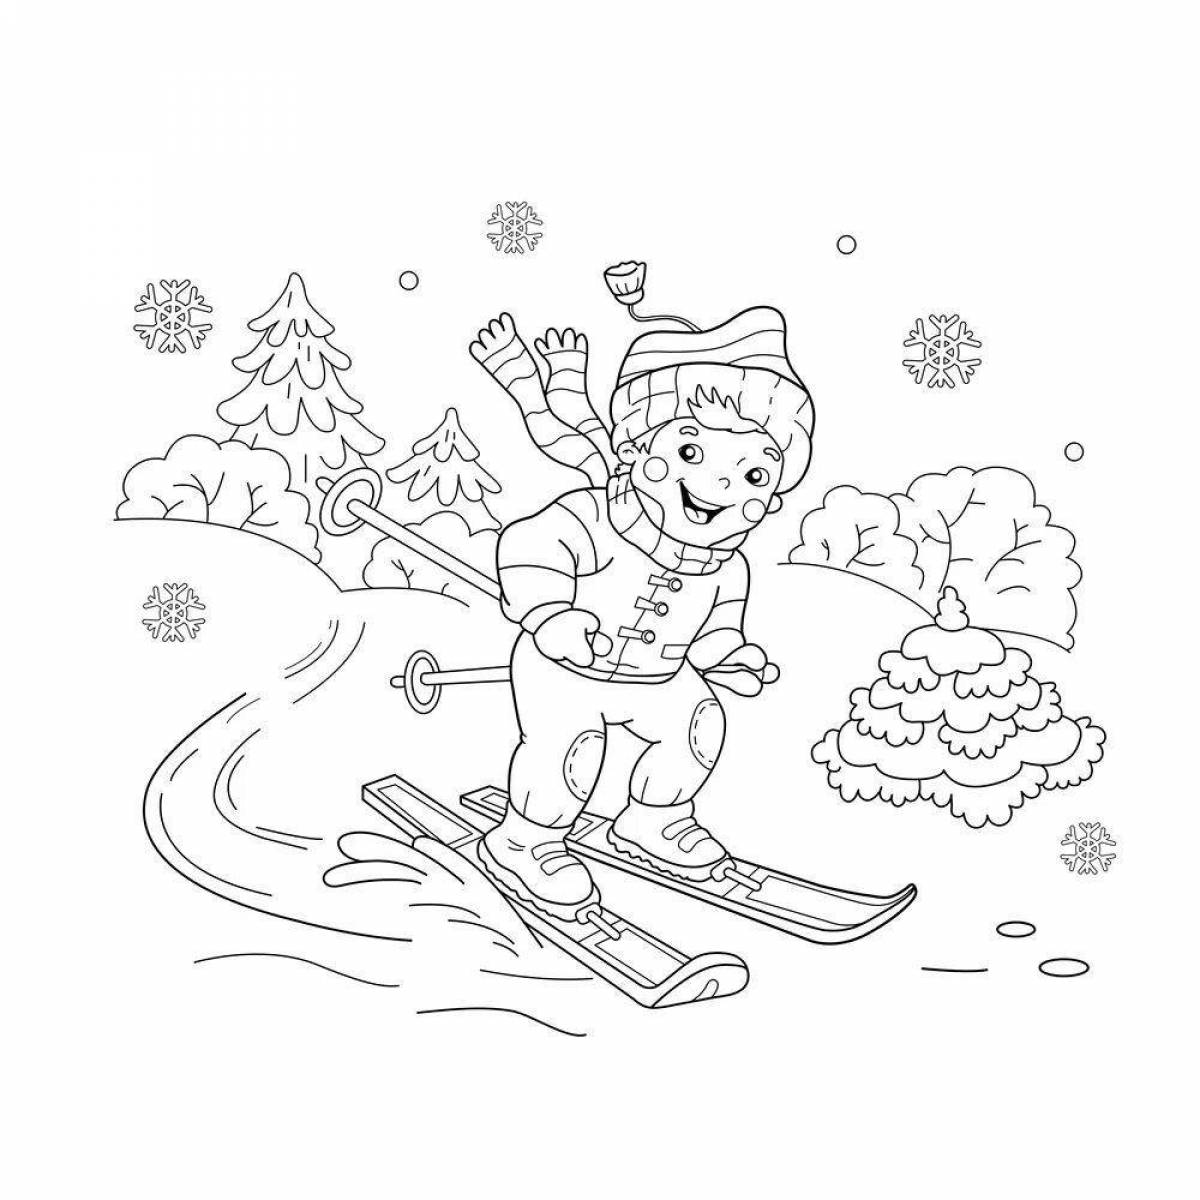 Vibrant winter sports coloring pages for kids